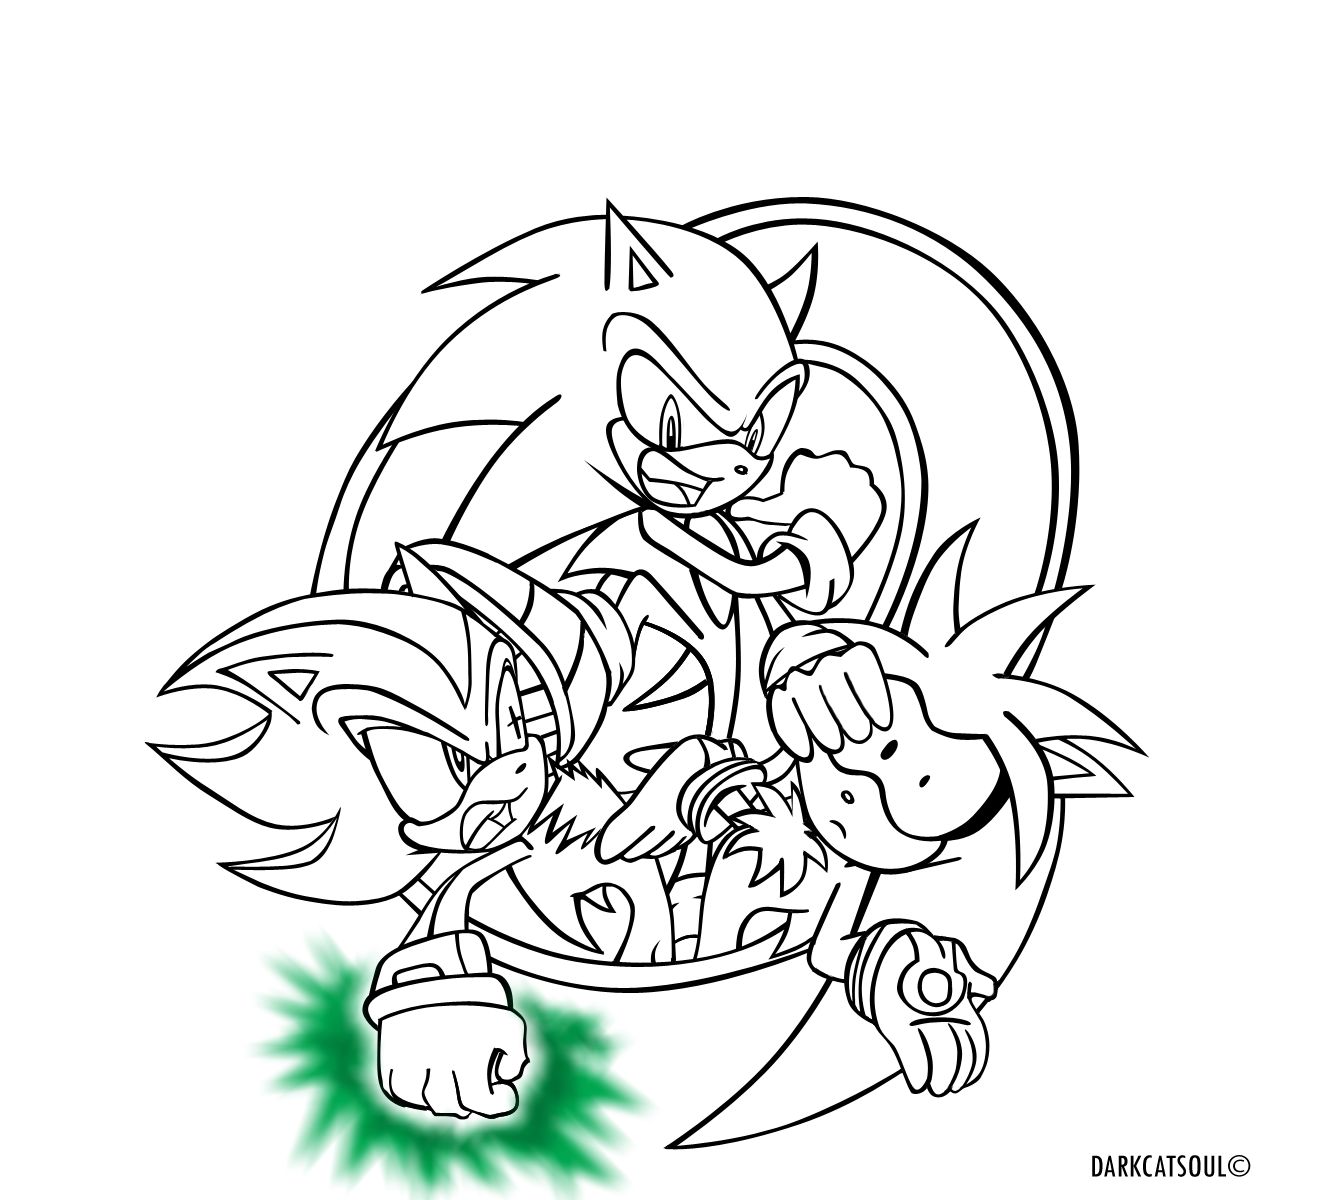 Sonic And Shadow Coloring - Coloring Pages for Kids and for Adults